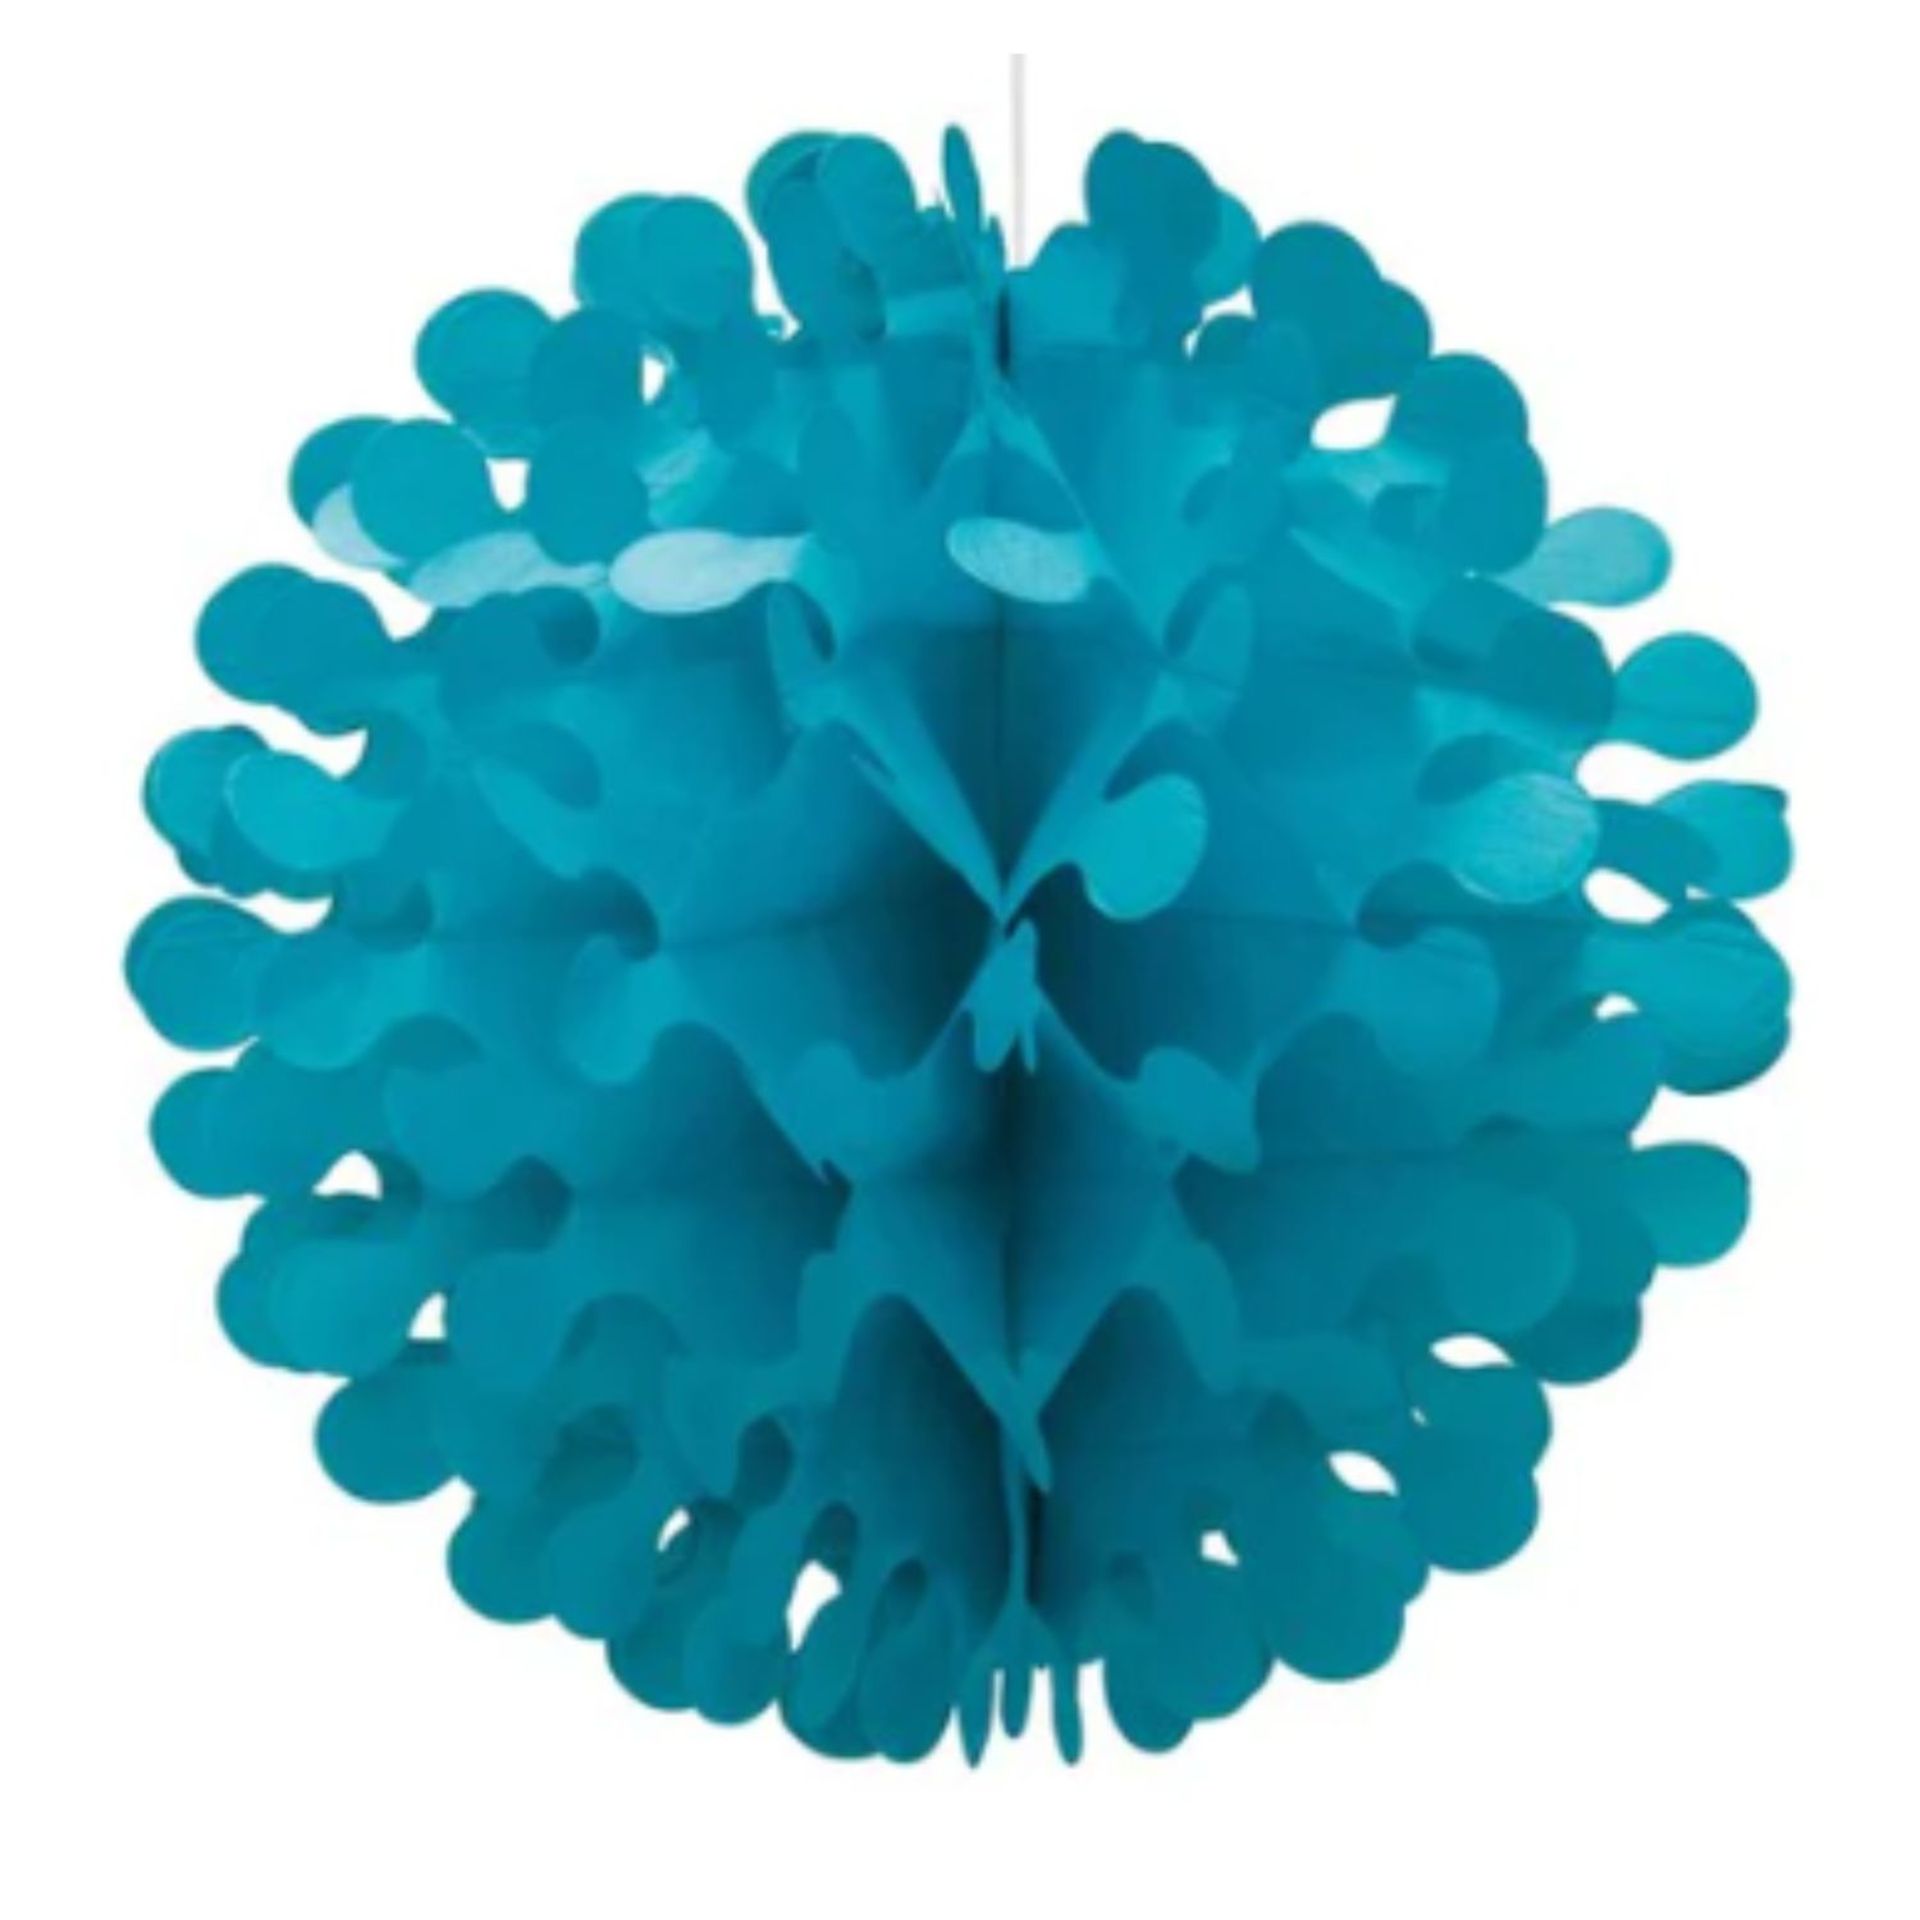 1000 PARTY SUPPLIES 12" FLUTTER TISSUE PAPER BALL - RANGE OF COLOURS, RRP £10,000 - Image 4 of 9